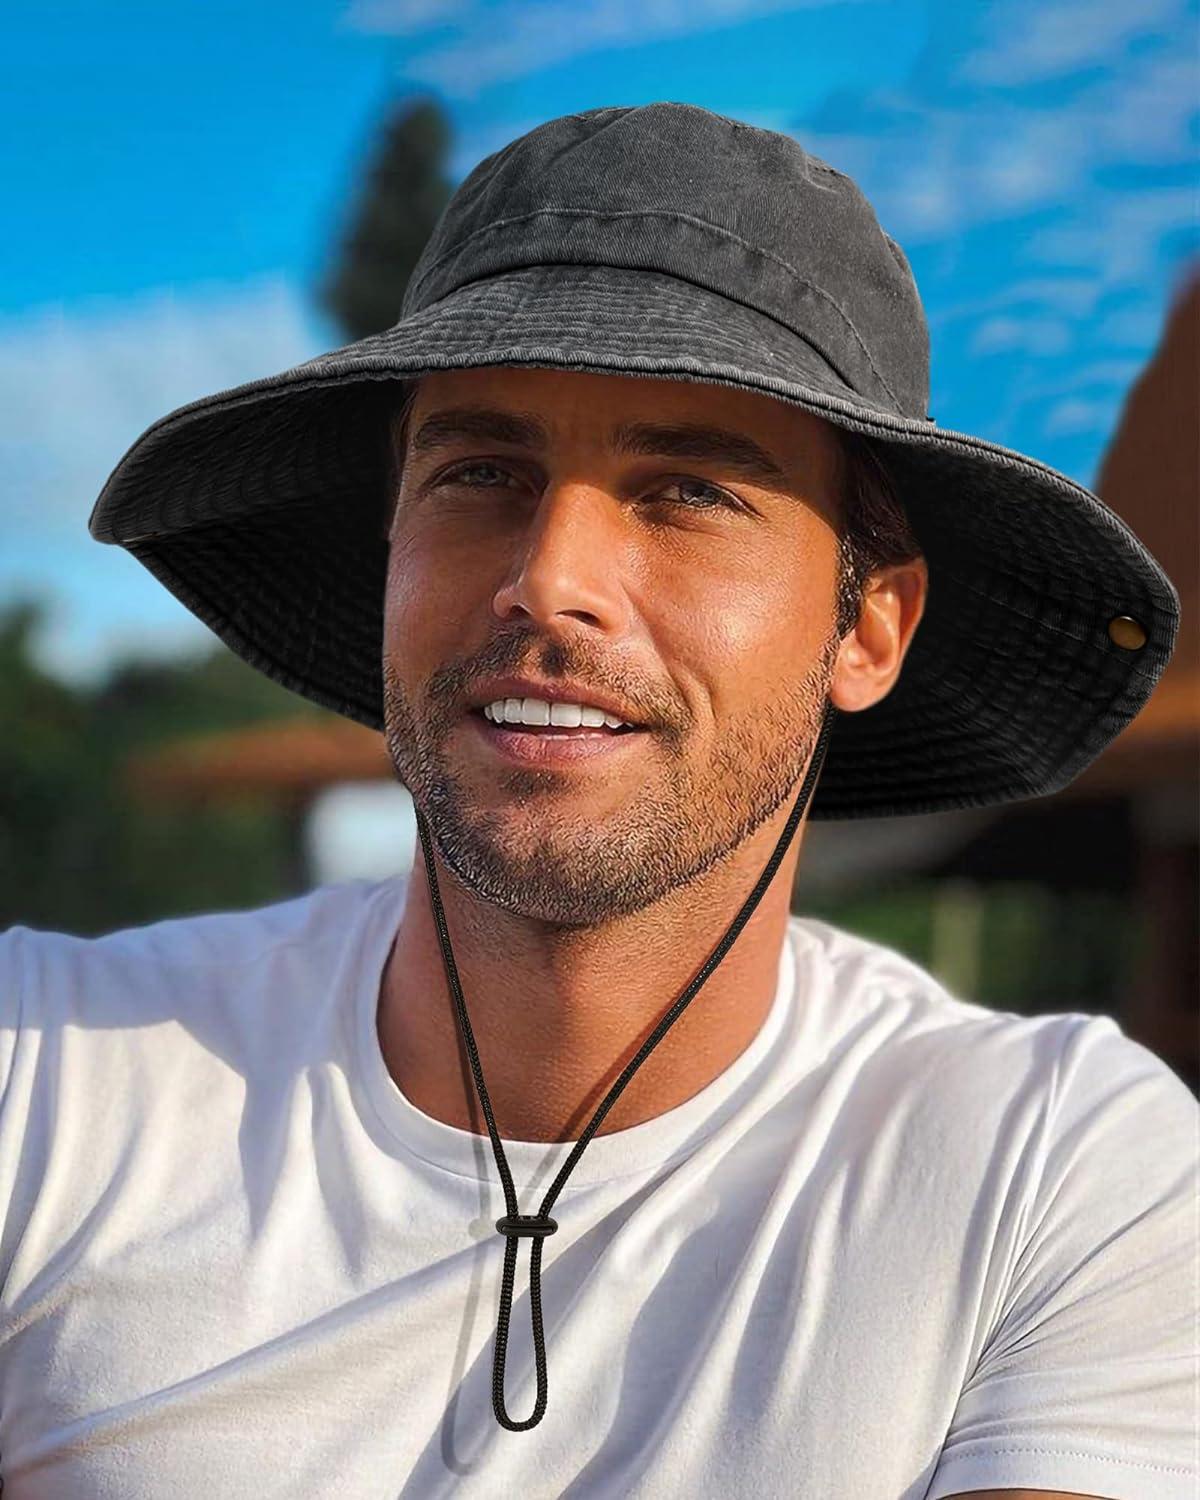 Wholesale Wide Brim Sun Caps Hats with Waterproof Breathable for Hiking  Camping Manufacturer and Supplier